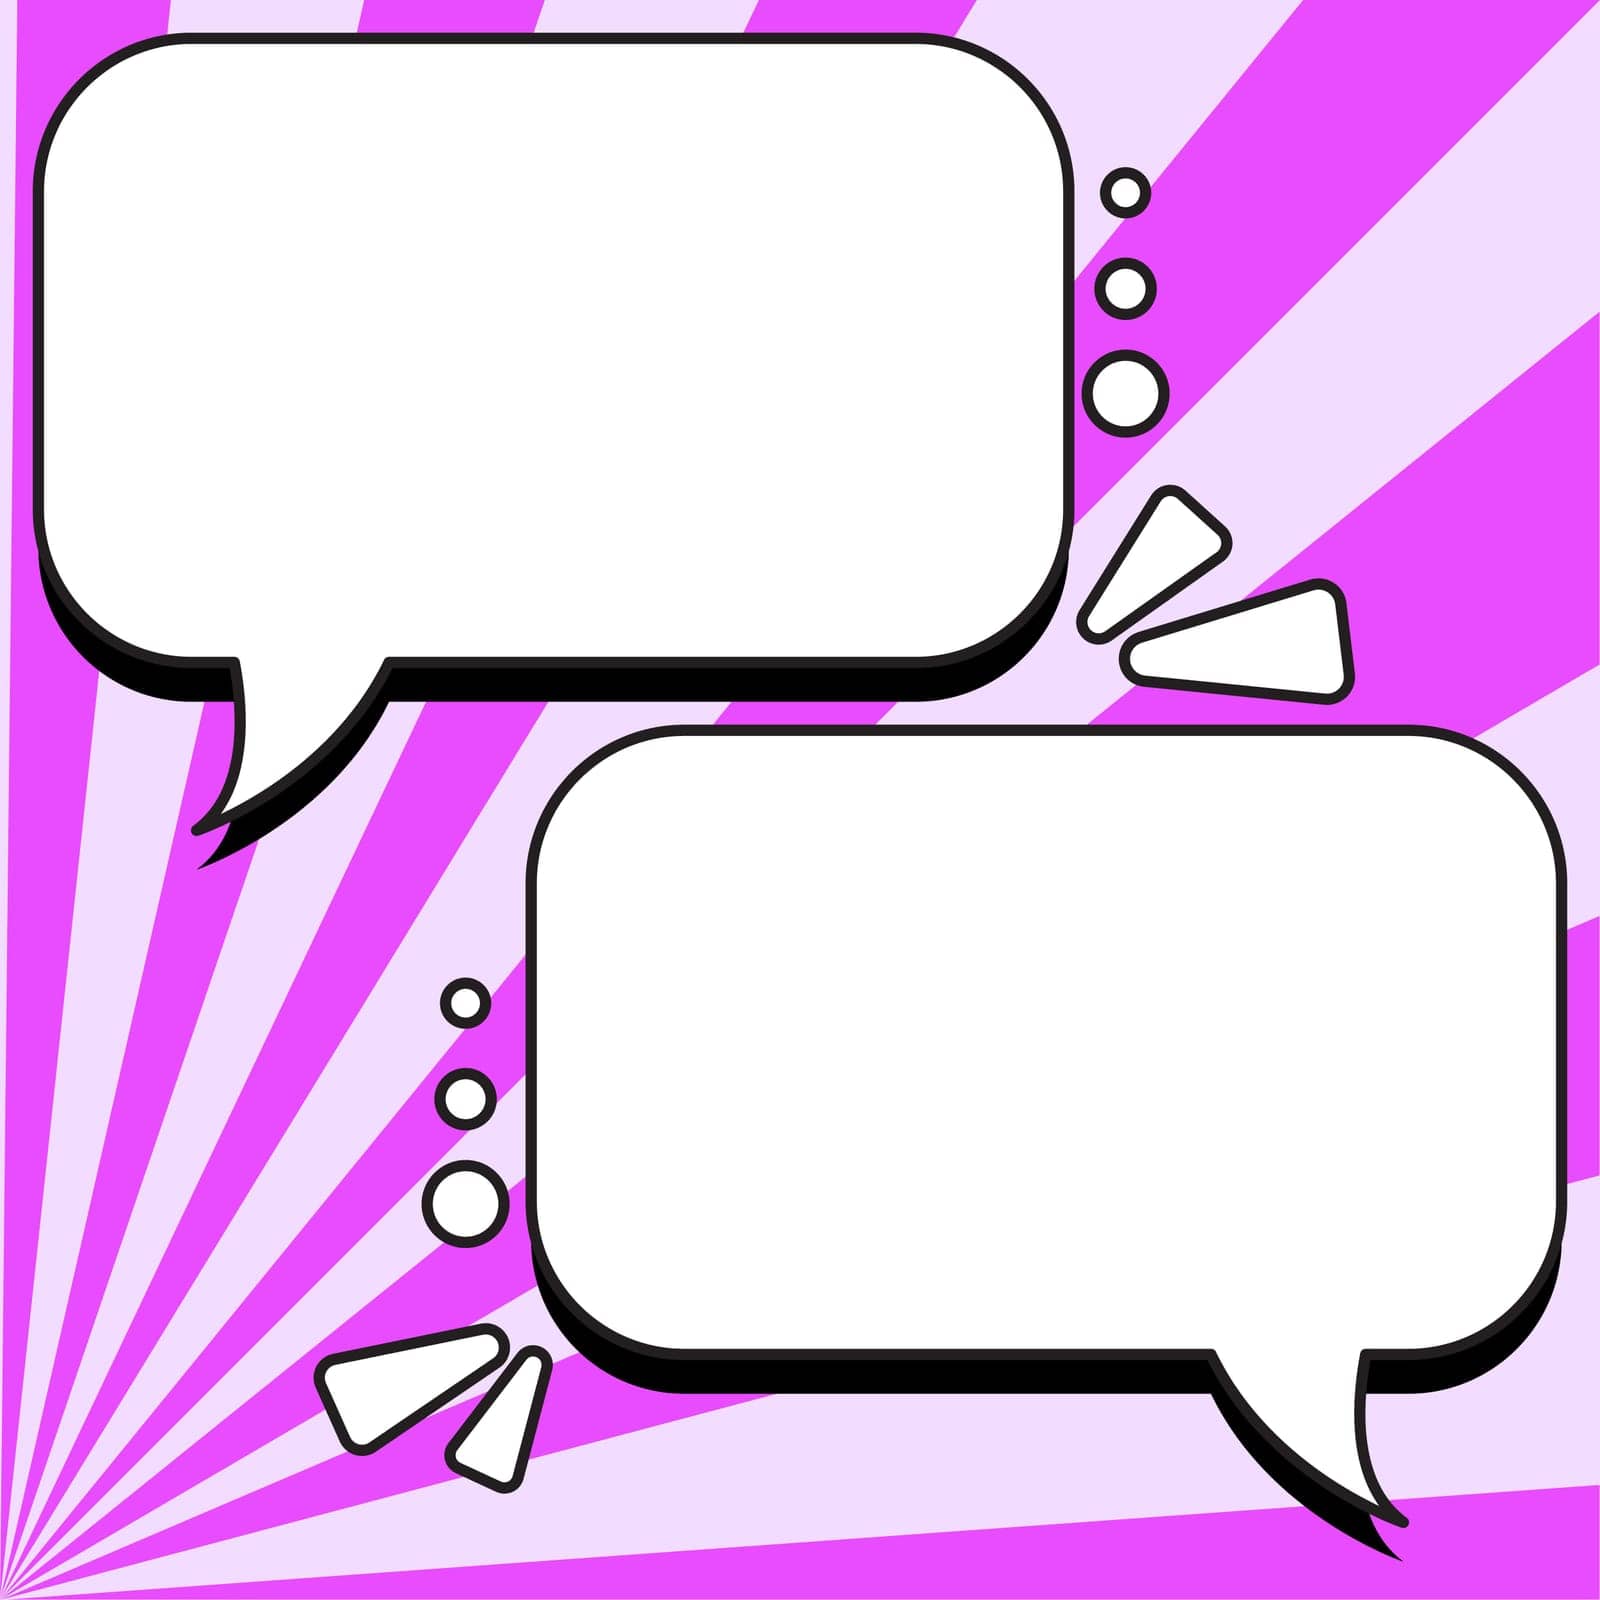 Comic Speech Bubble With Copy Space. Empty Template In Explosion Framework